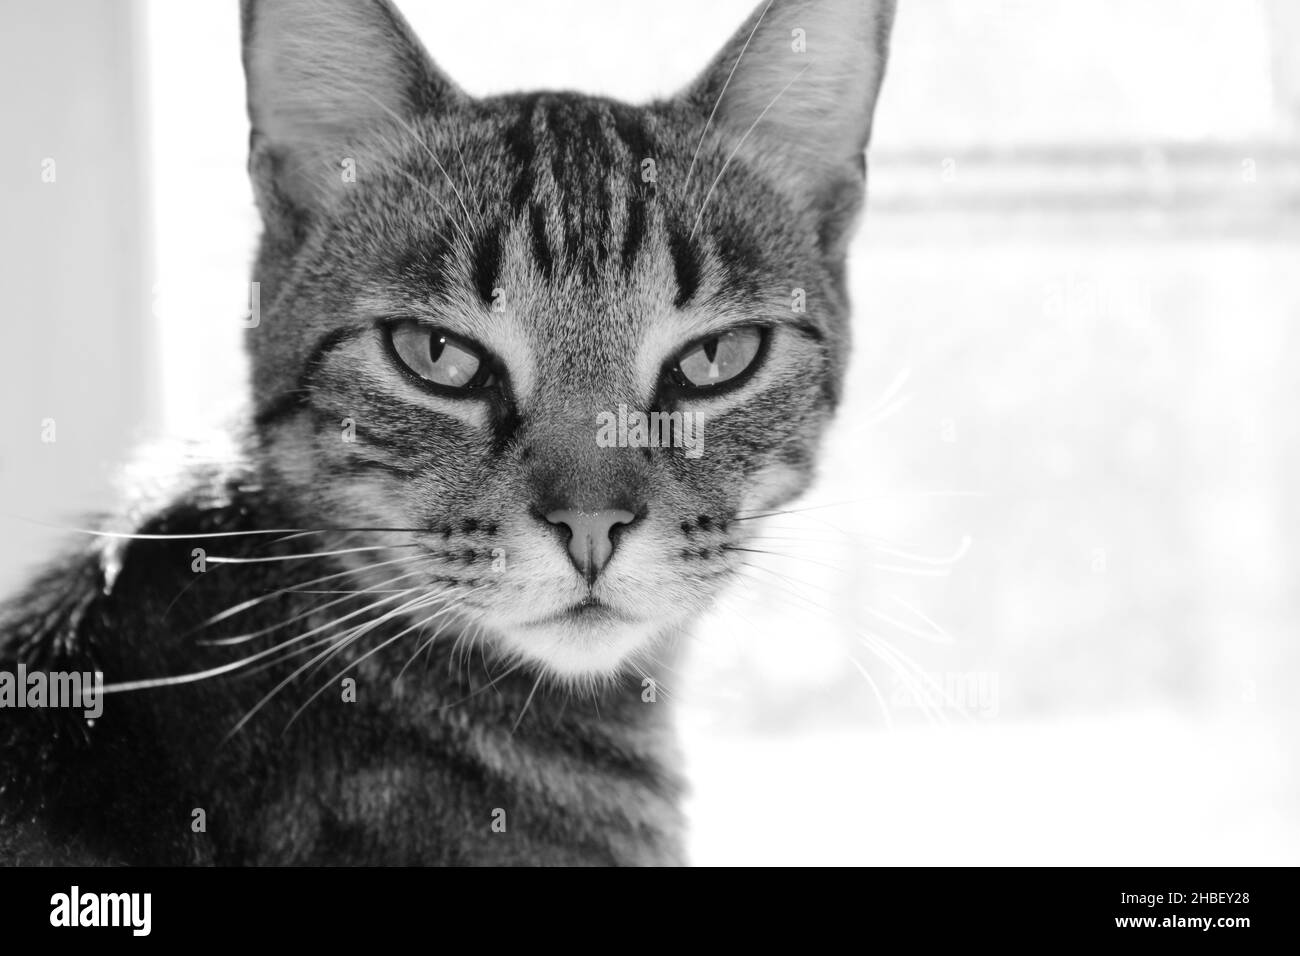 Portrait of a tabby cat in black and white focused close starring at the camera. Angry looking focused cat. Funny. Concept Stock Photo